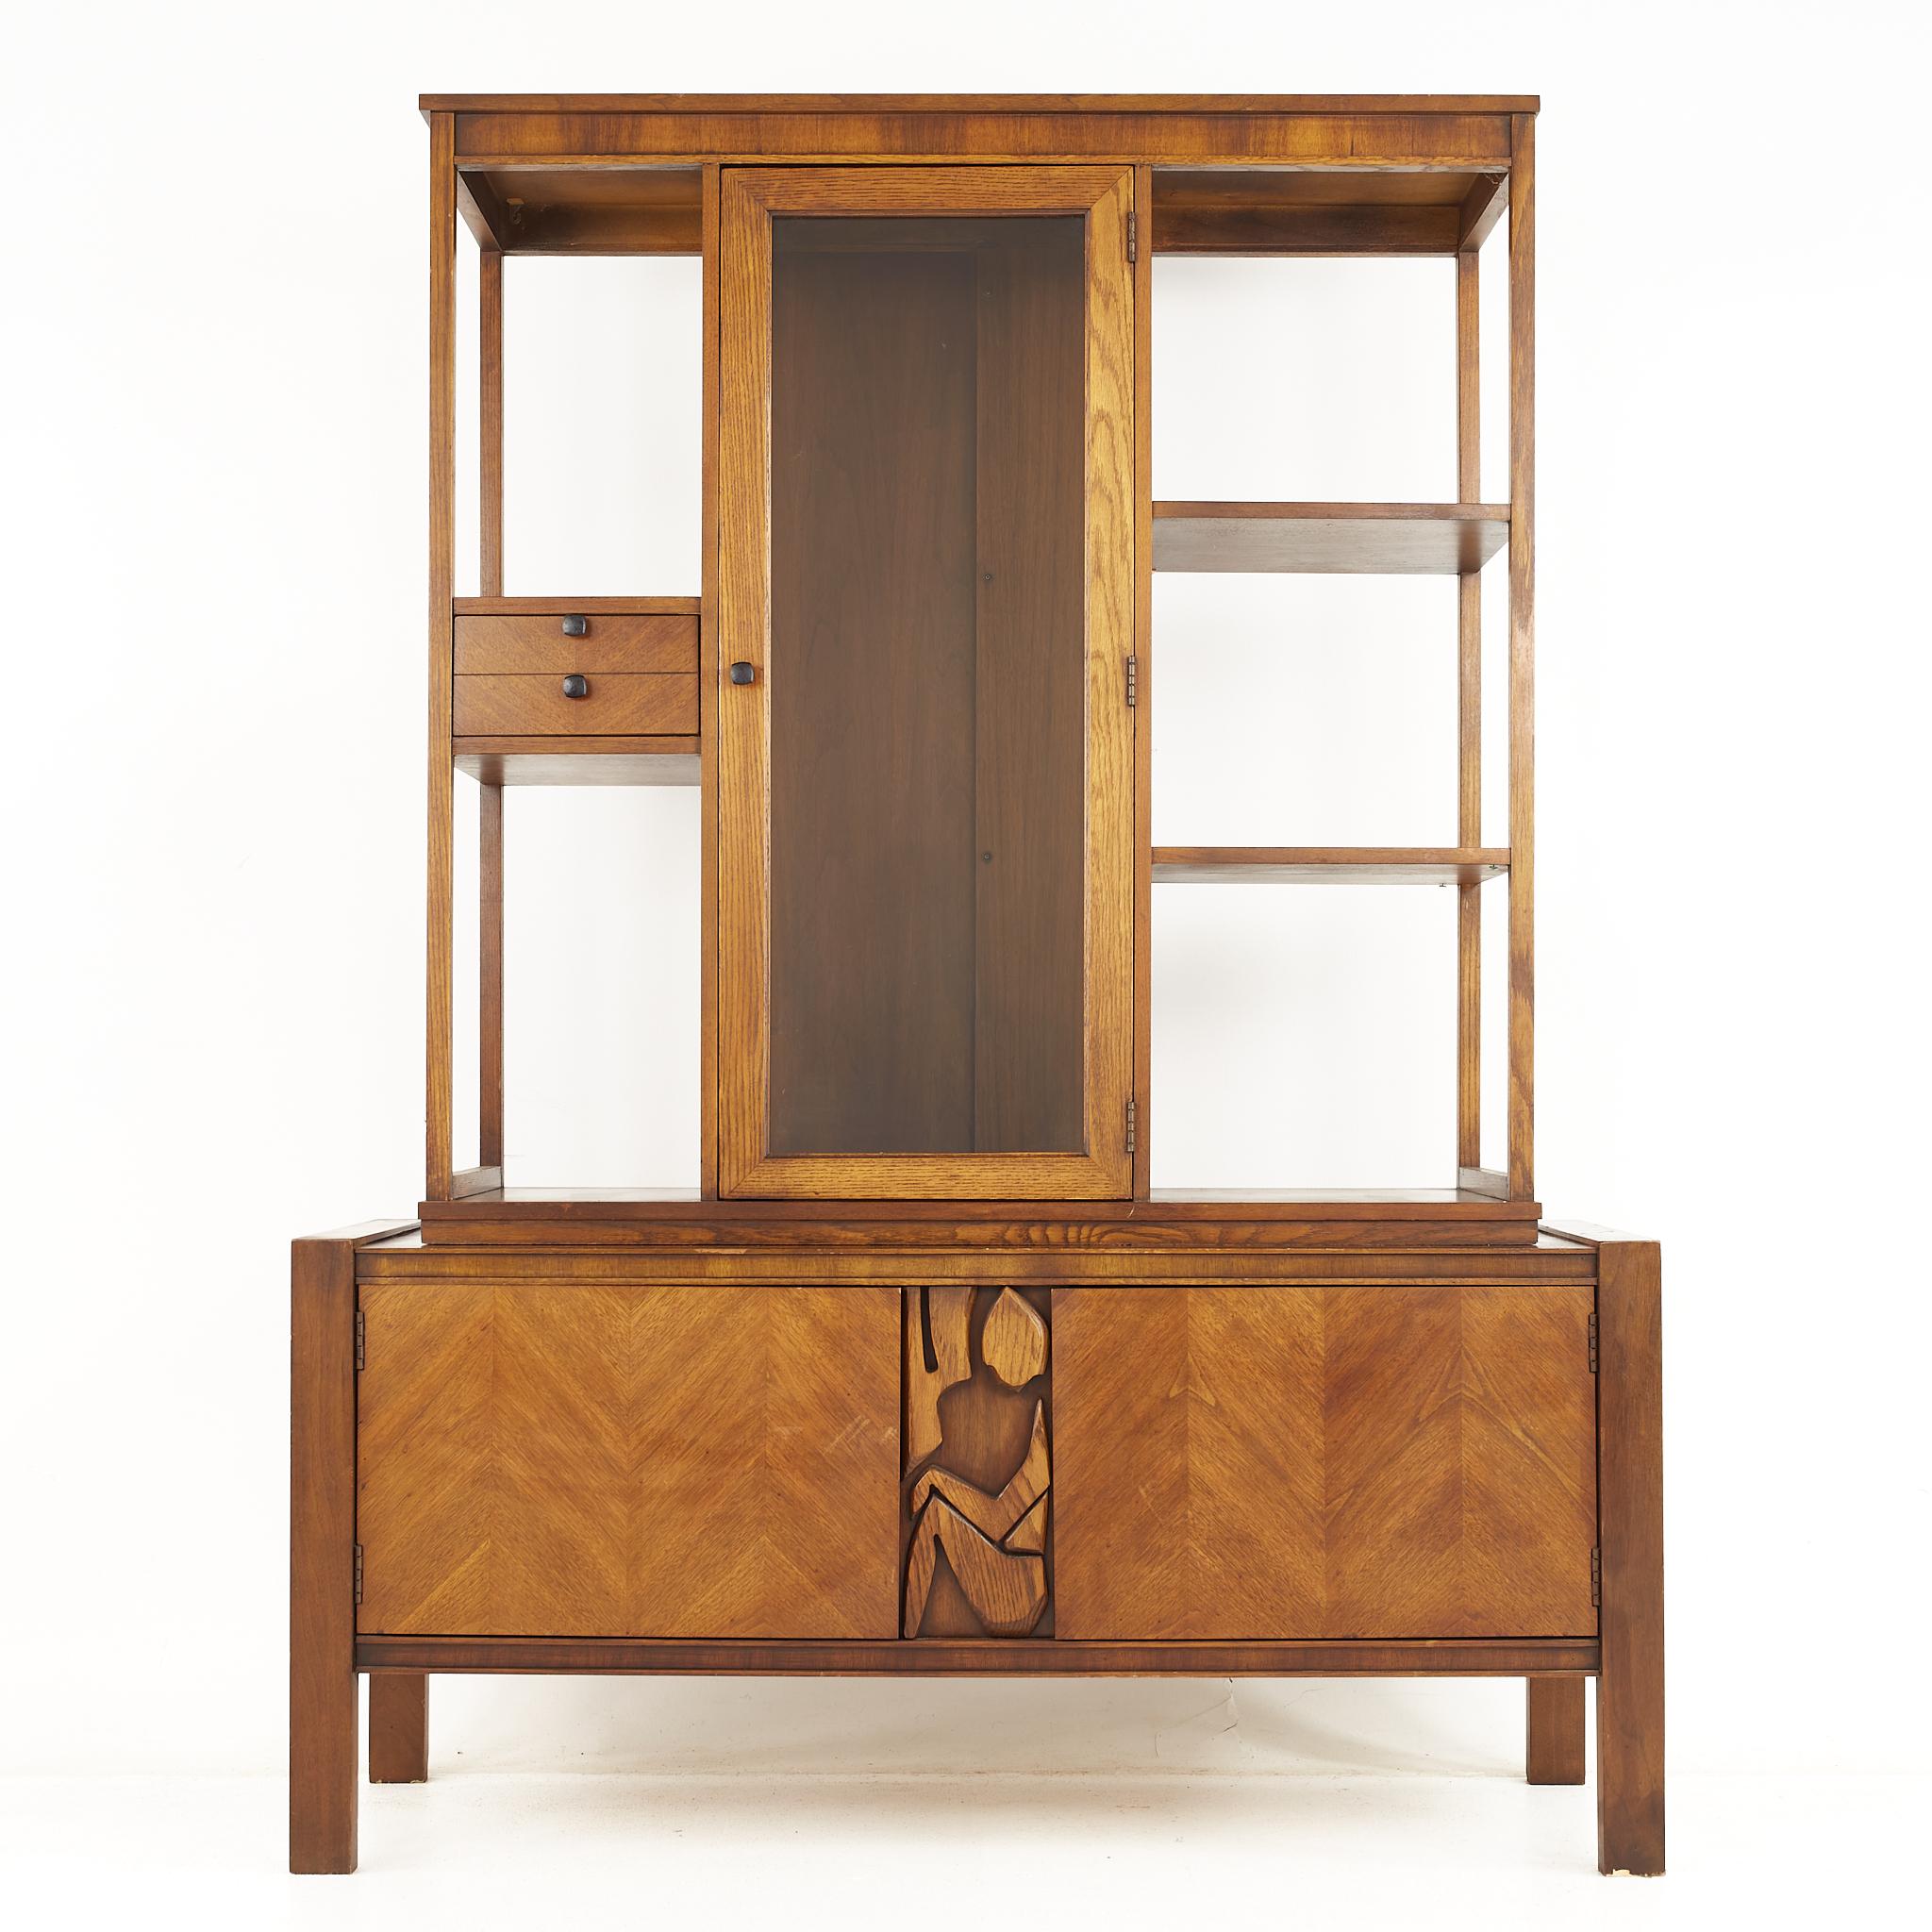 United Furniture mid century Tiki Brutalist room divider

The buffet measures: 55 wide x 17.25 deep x 25.5 inches high
The hutch measures: 46 wide x 15 deep x 47.25 inches high

All pieces of furniture can be had in what we call restored